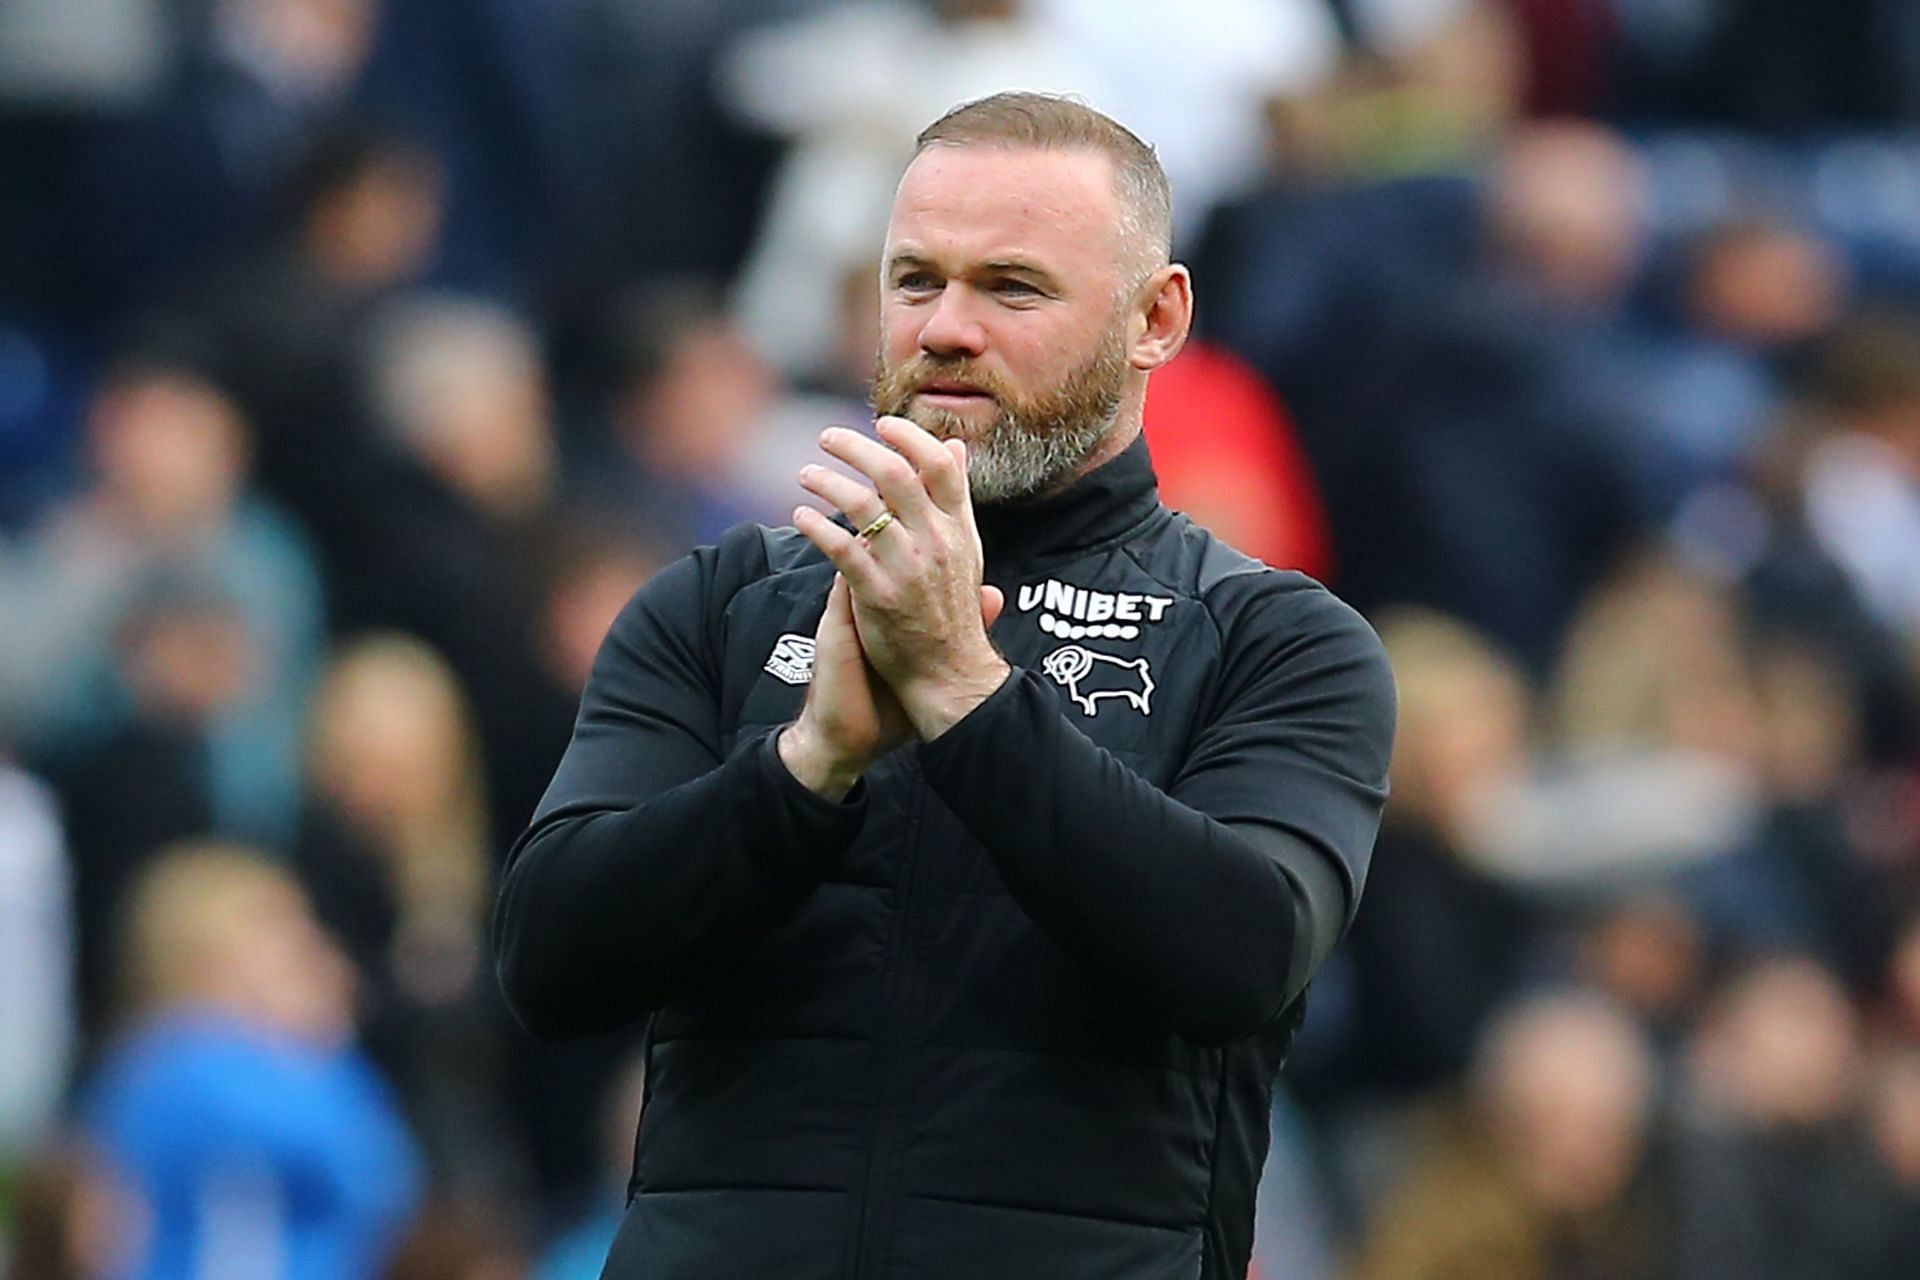 Wayne Rooney has criticized Manchester United players for their lack of intent against Liverpool.